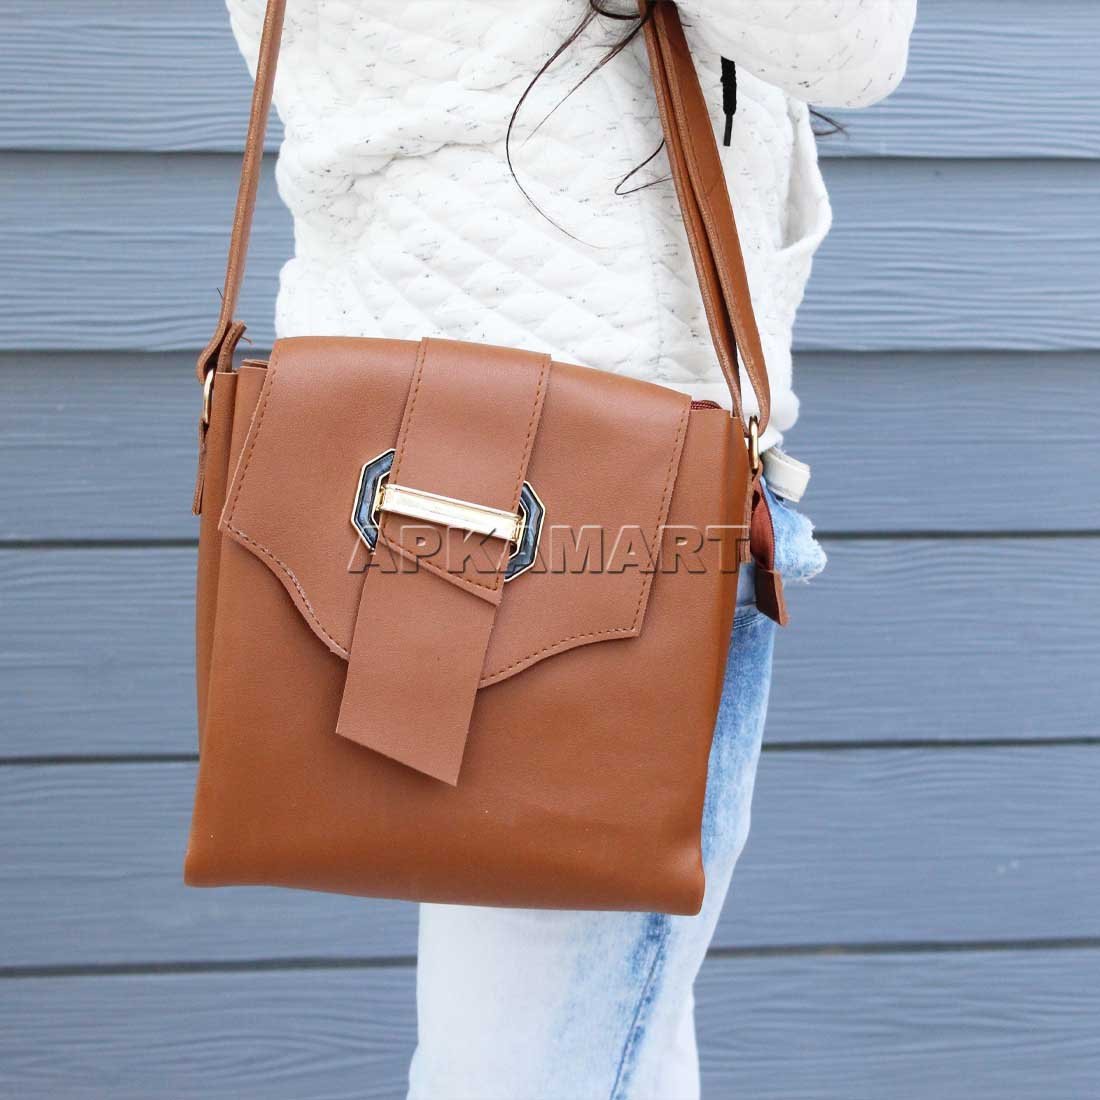 Leather Crossbody Bag for women purse tote ladies bags satchel travel